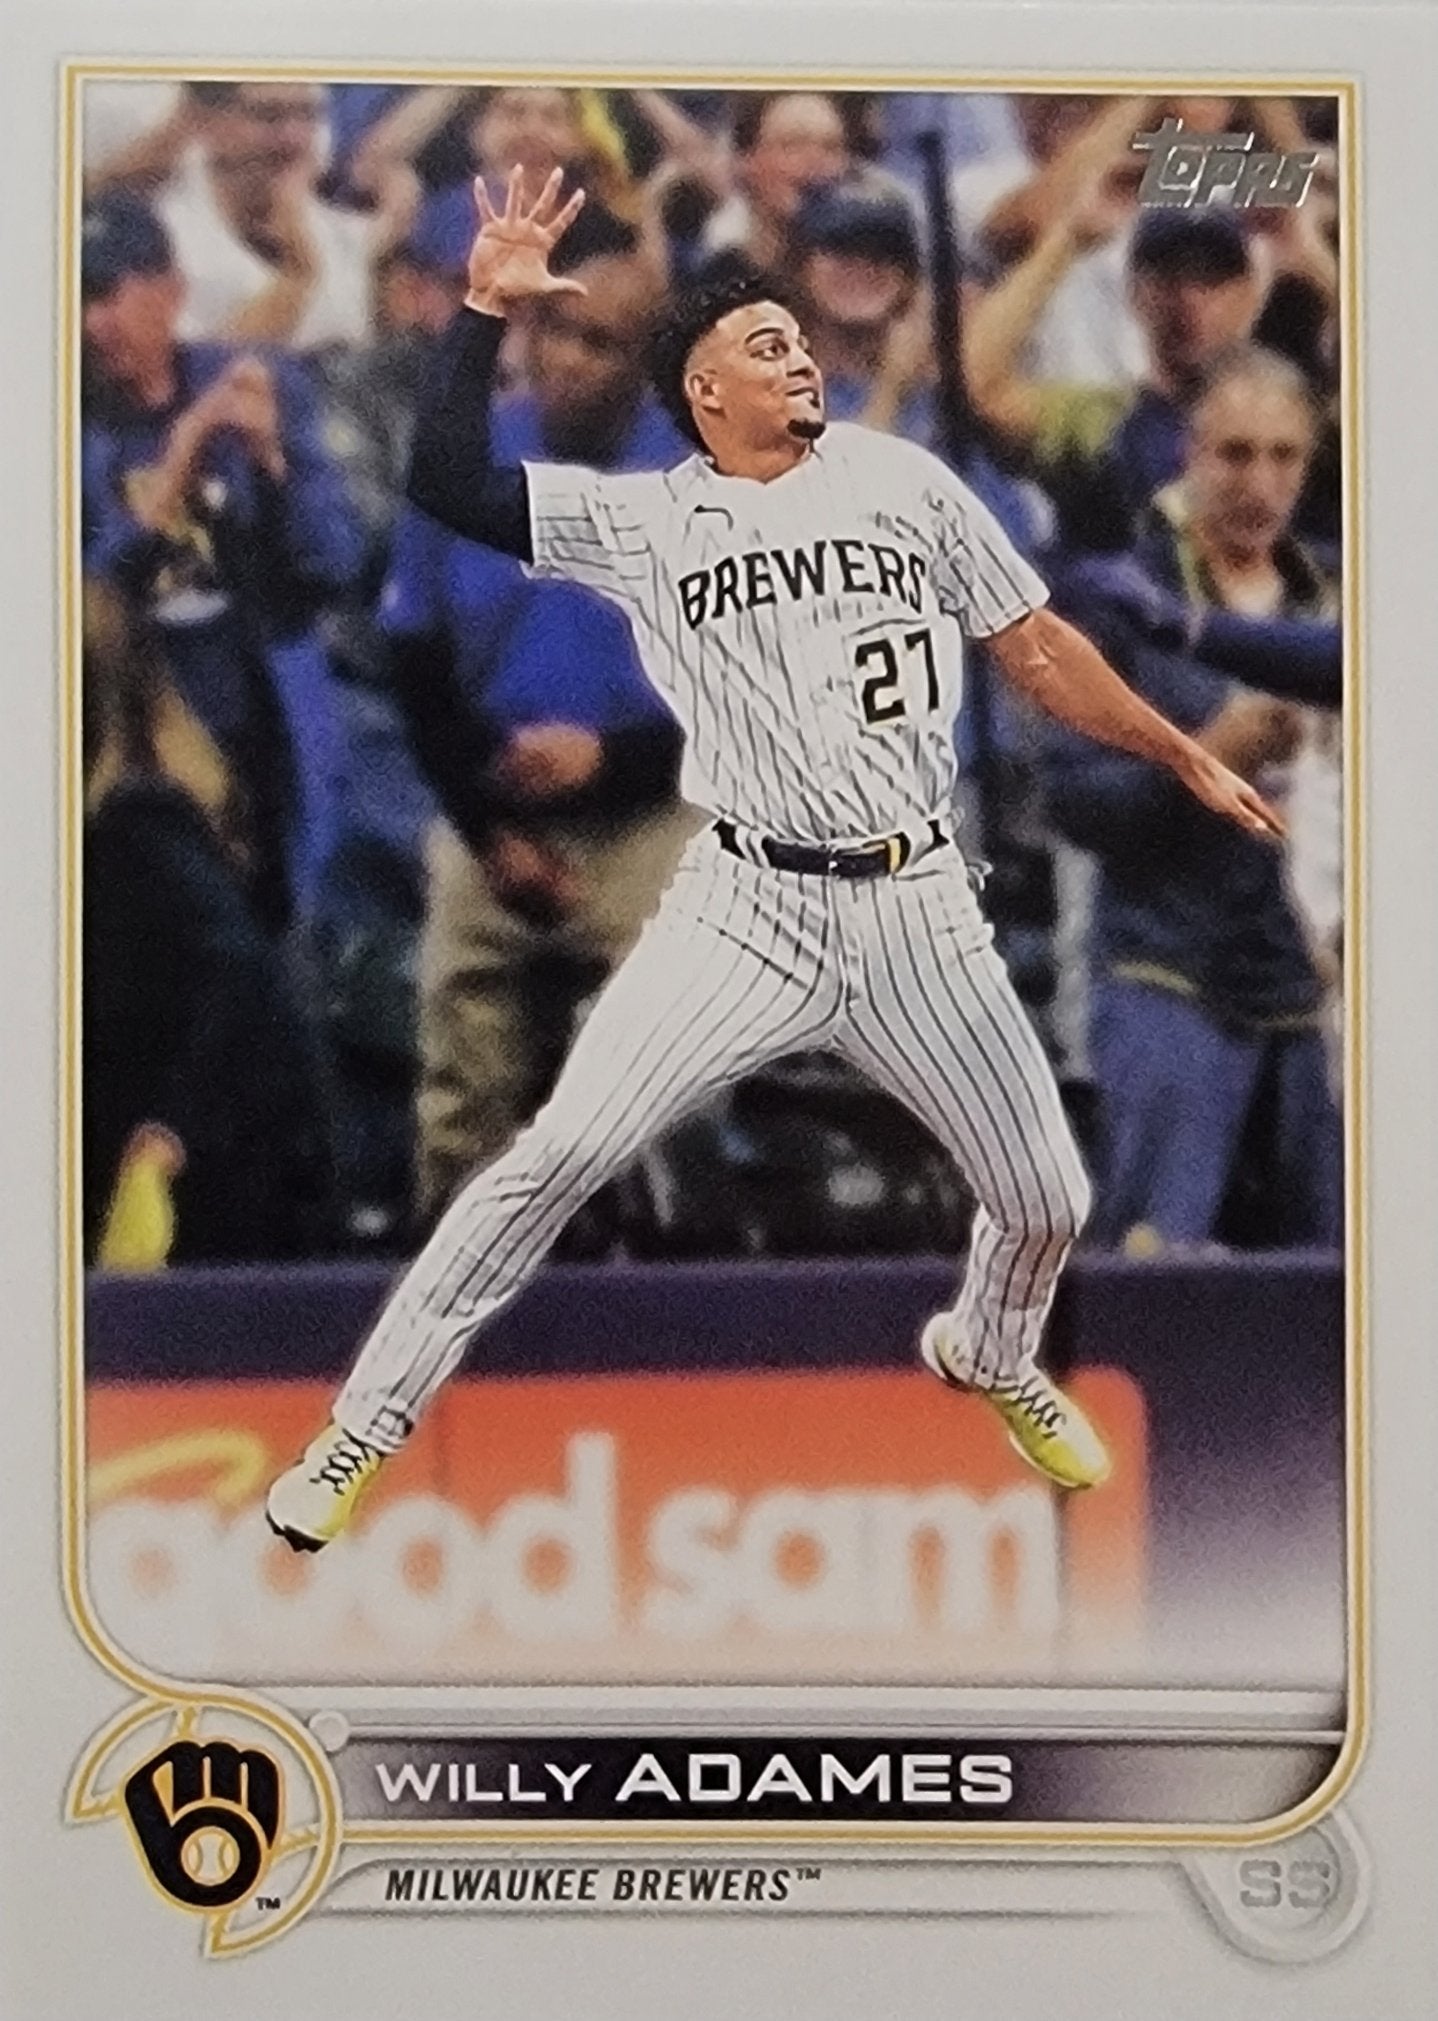 2022 Topps Series 2 Willy Adames Baseball Card AVM1 simple Xclusive Collectibles   